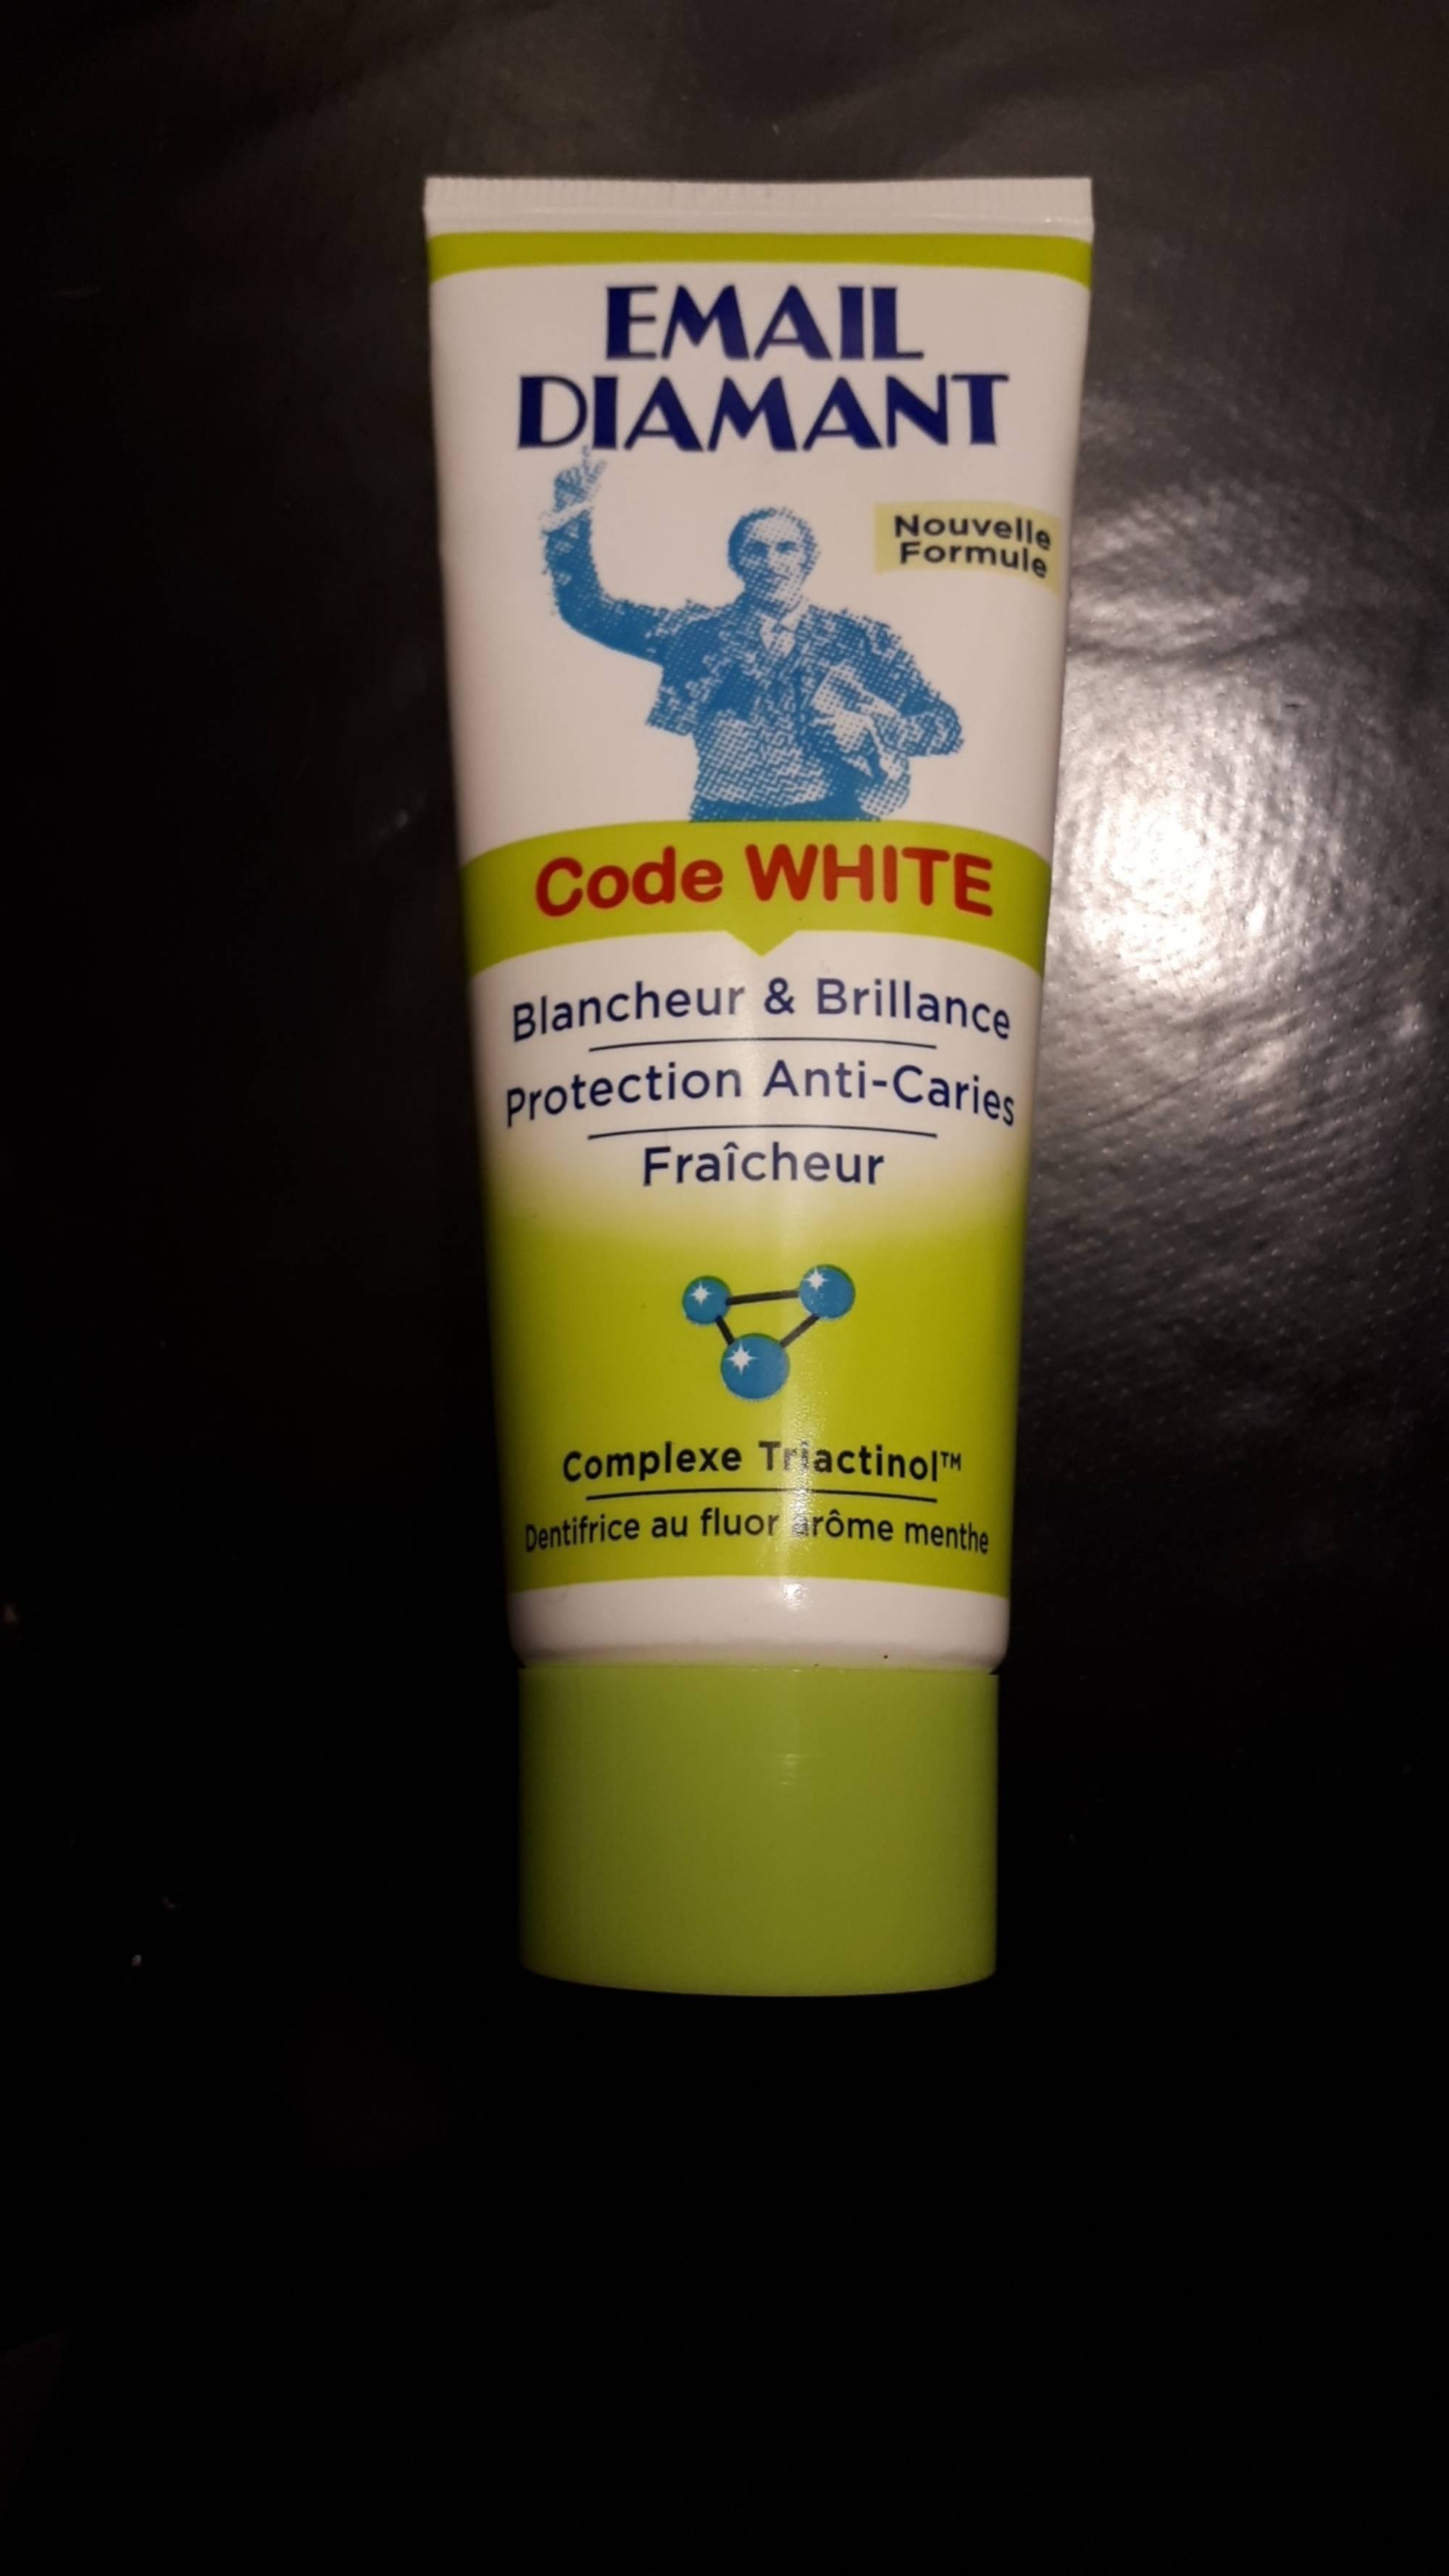 EMAIL DIAMANT - Code white - Blancheur & Brillance - Protection anti-caries Dentifrice